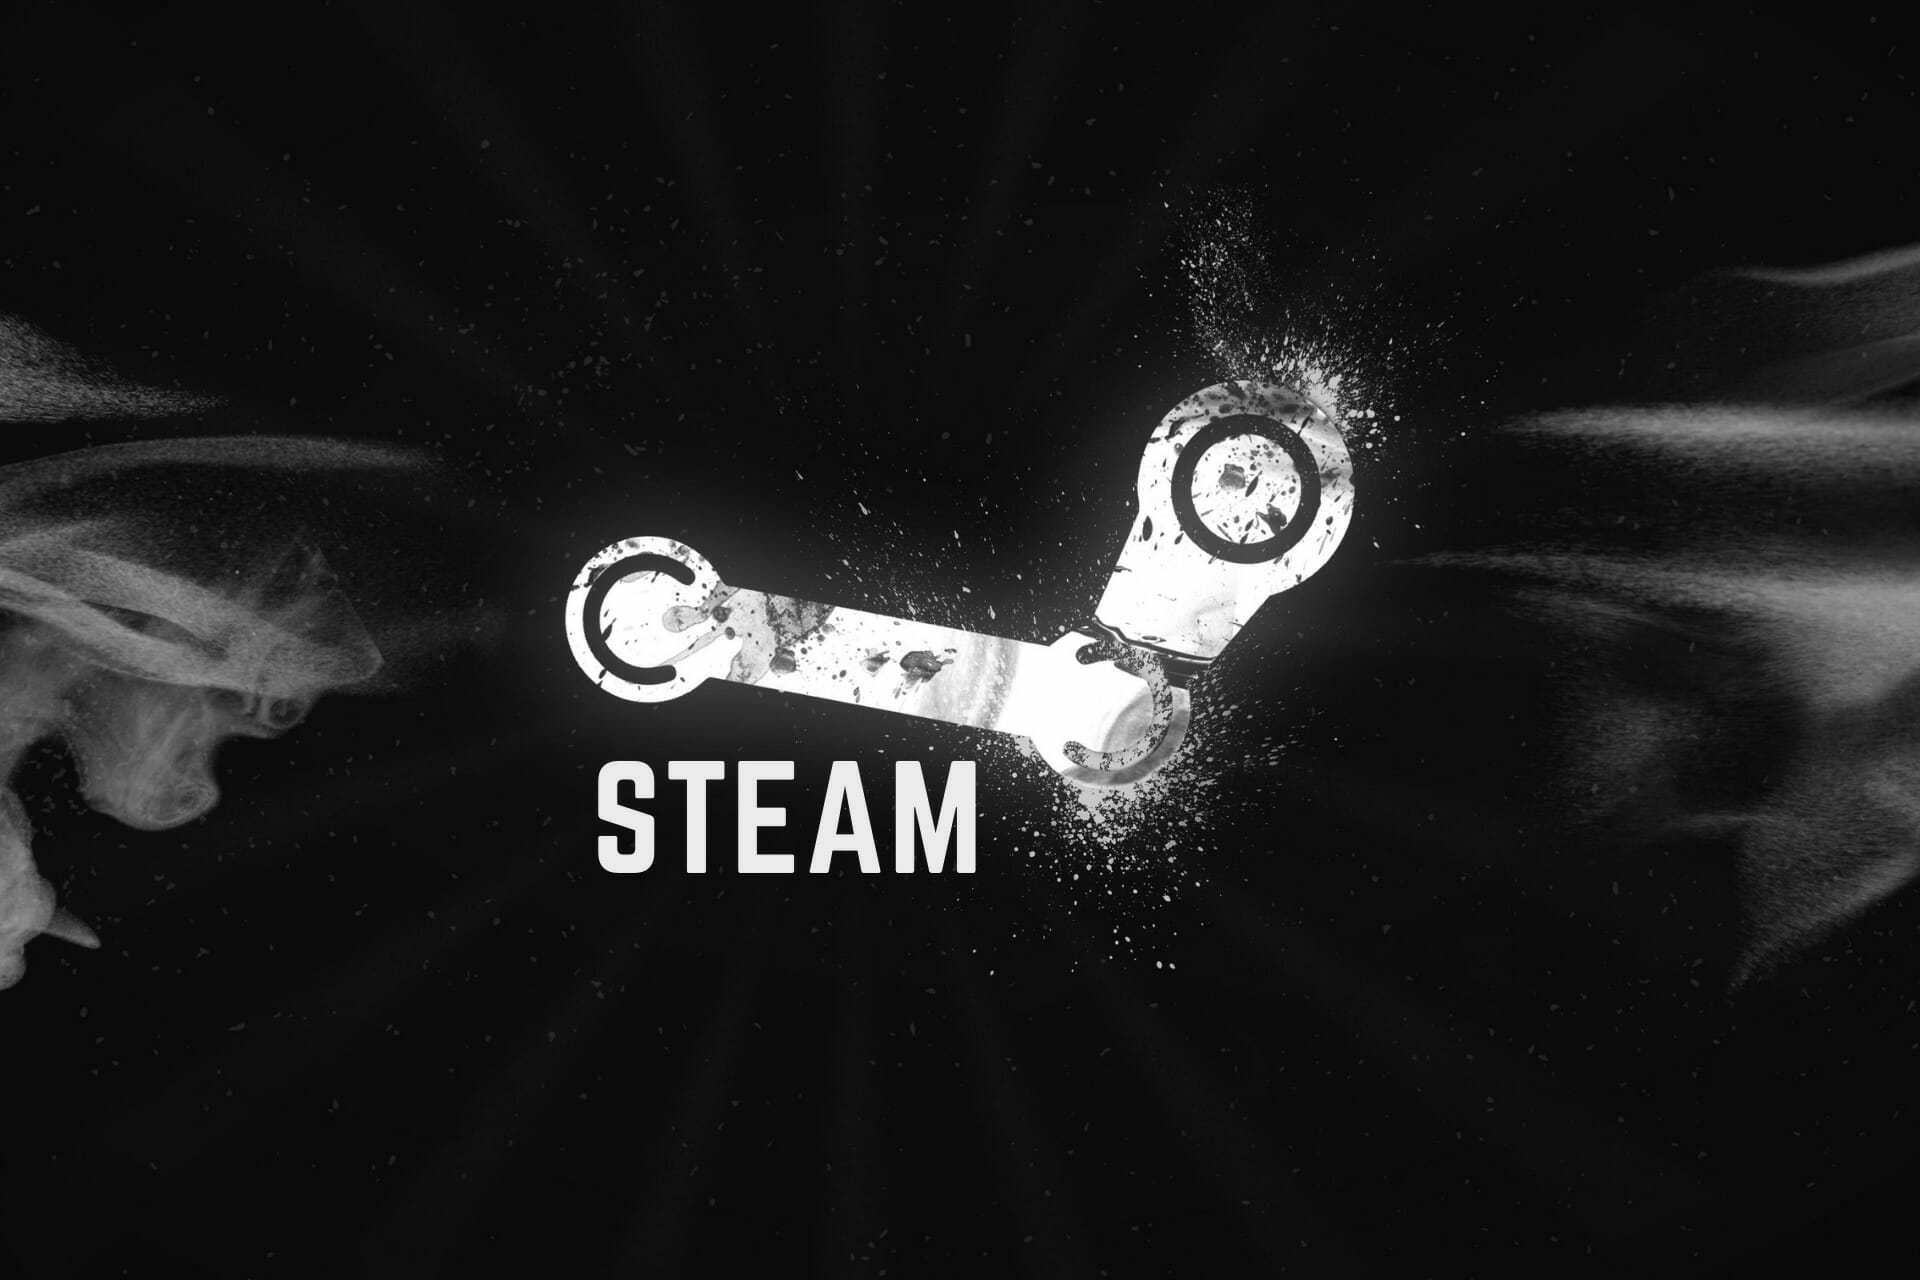 How to prevent Internet from disconnecting Steam while playing a game